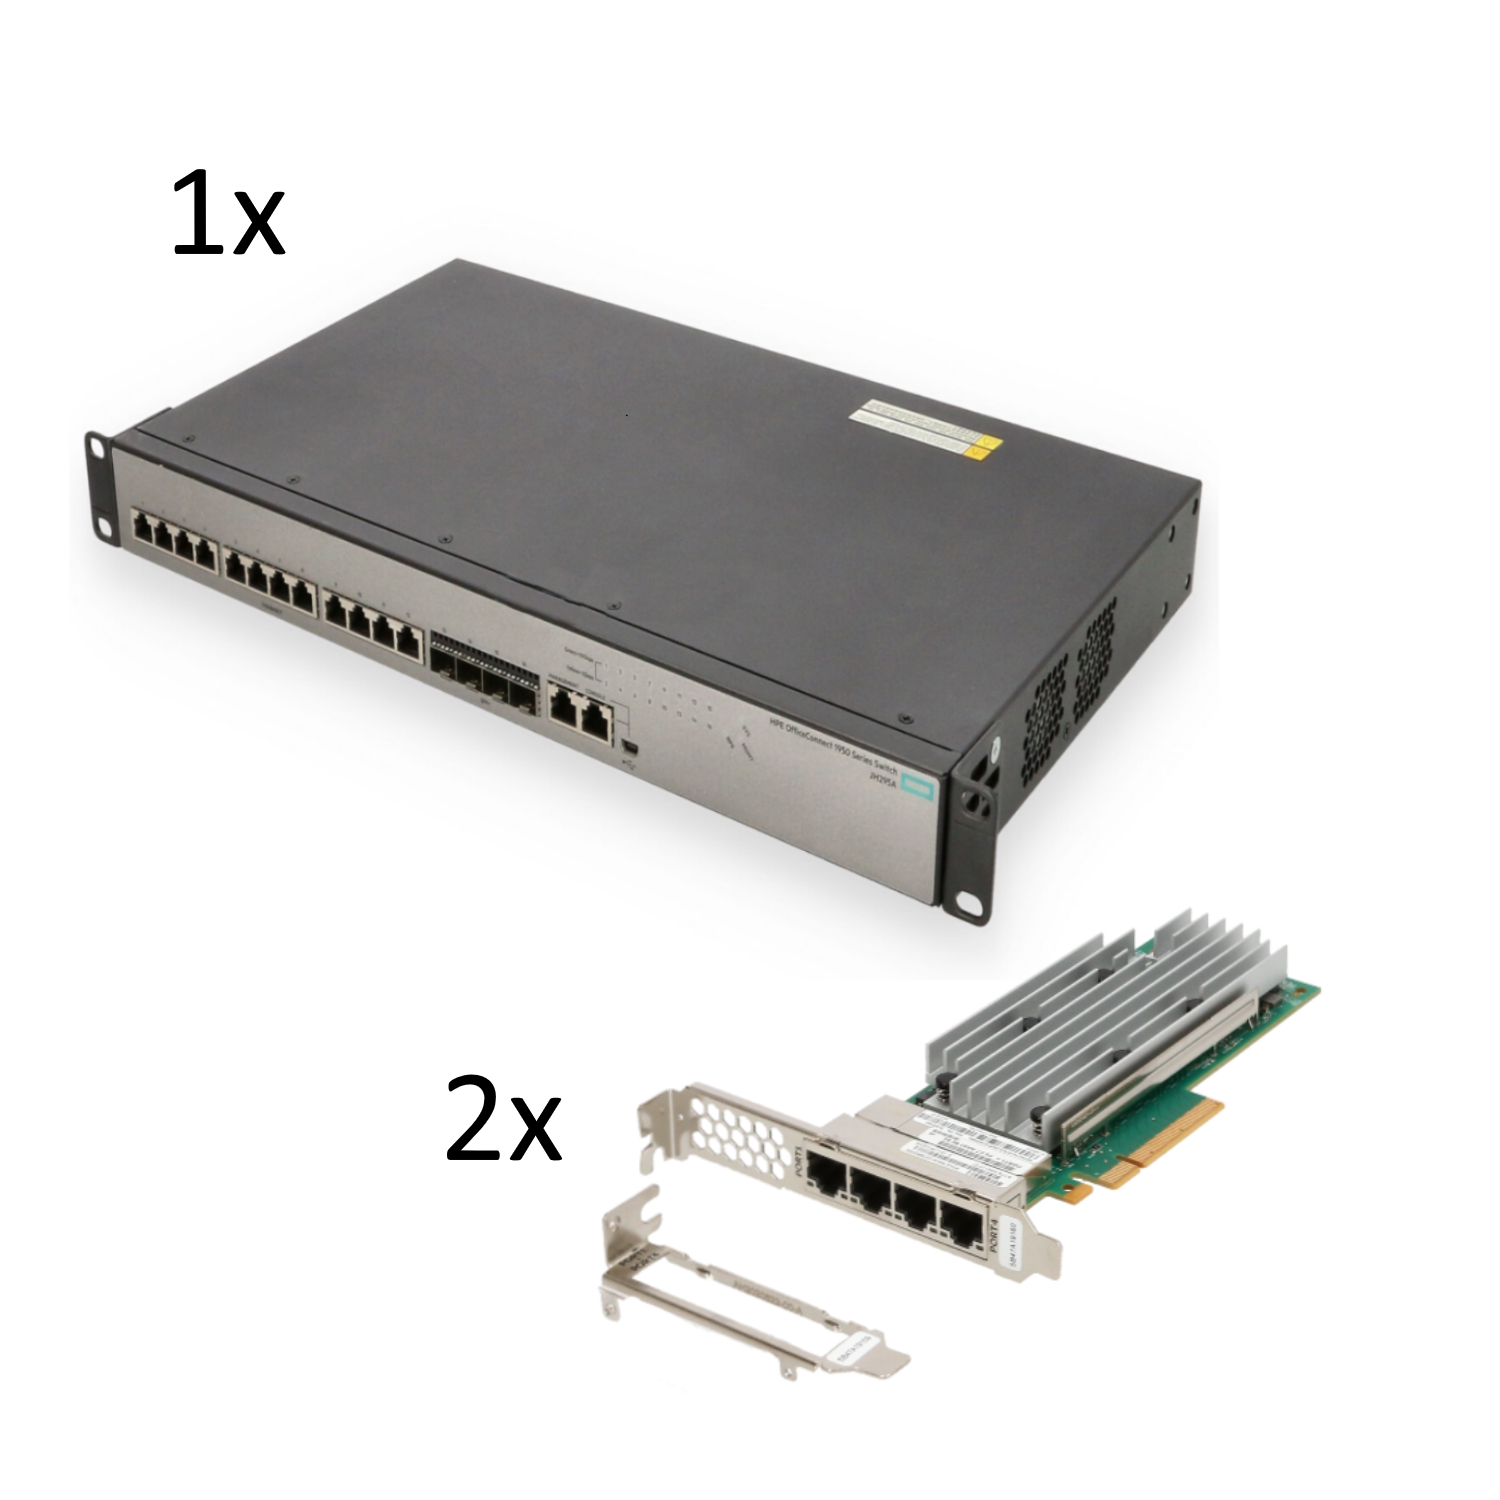 Starterkit "L" 1x HPE OfficeConnect 1950-12XGT-4SFP+ 12x 10GBase-T 4x SFP+ 10G Switch und 2x QLogic QL41134 4x 10GBase-T PCIe Server Ethernet Adapter